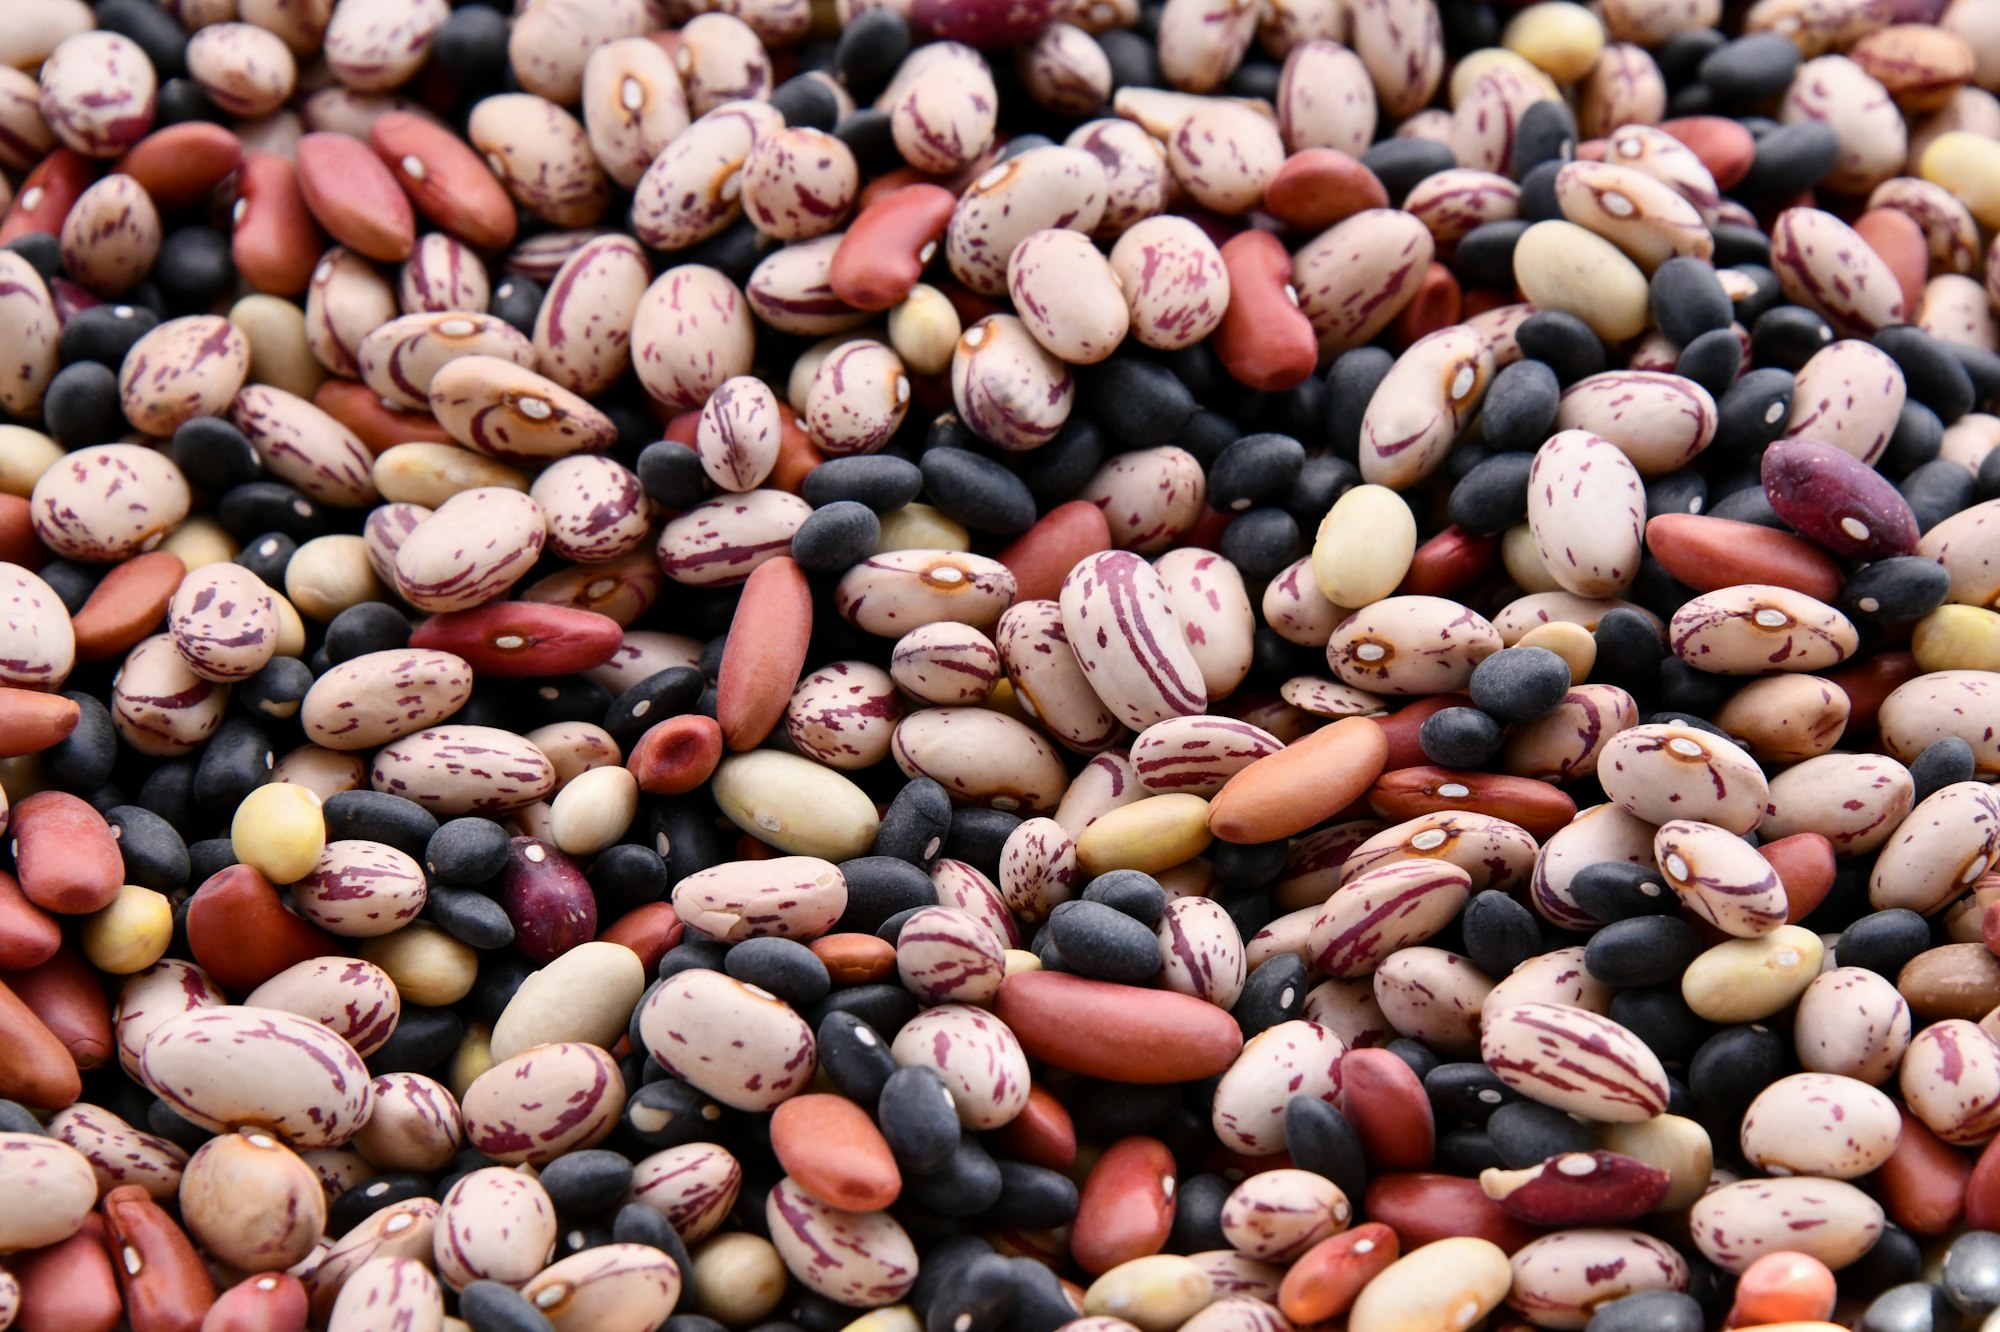 beans and legumes, beans and breastfeeding, legumes and breastfeeding